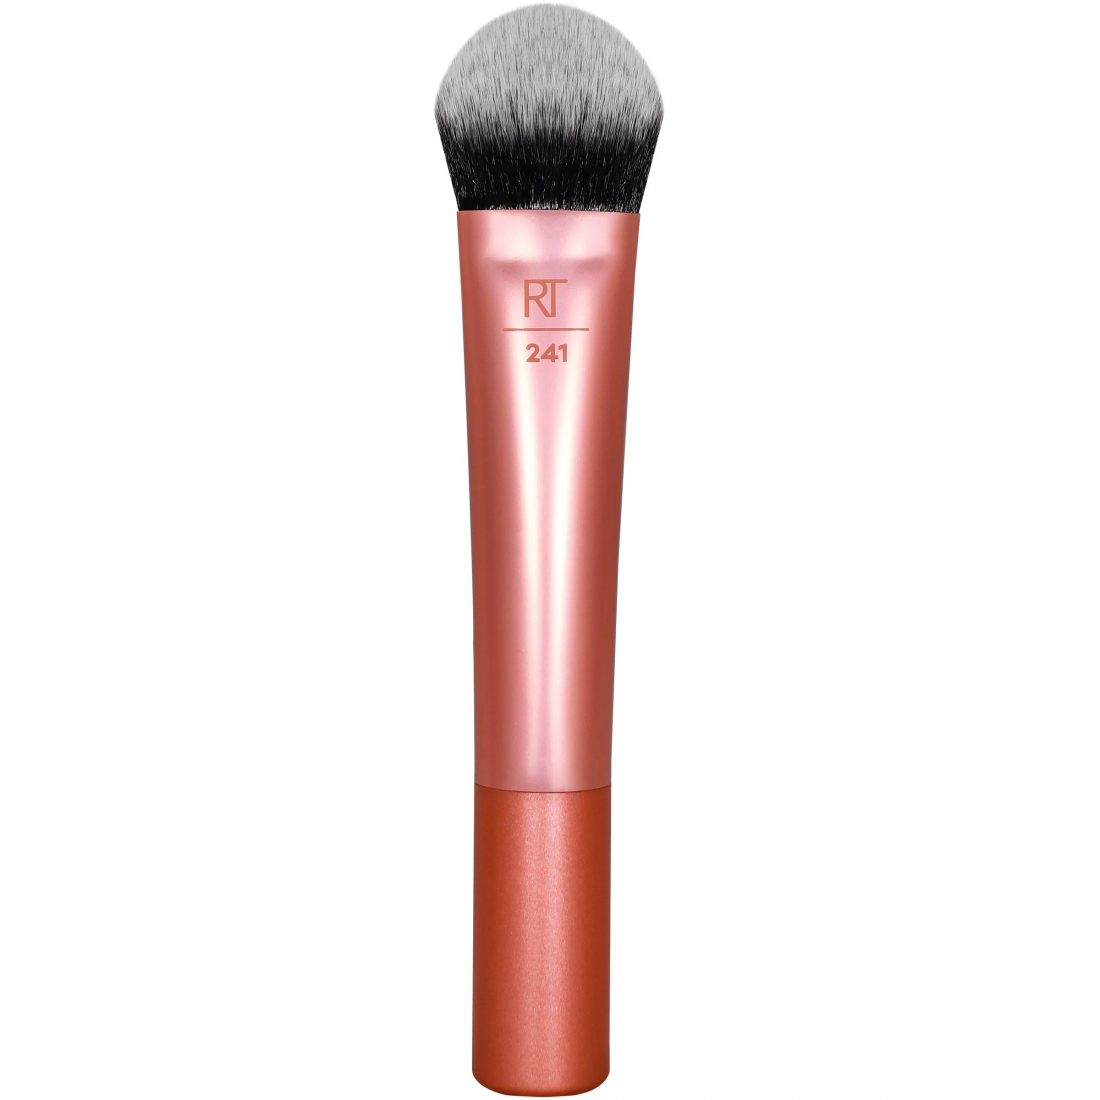 'Seamless Complexion' Make-up Brush